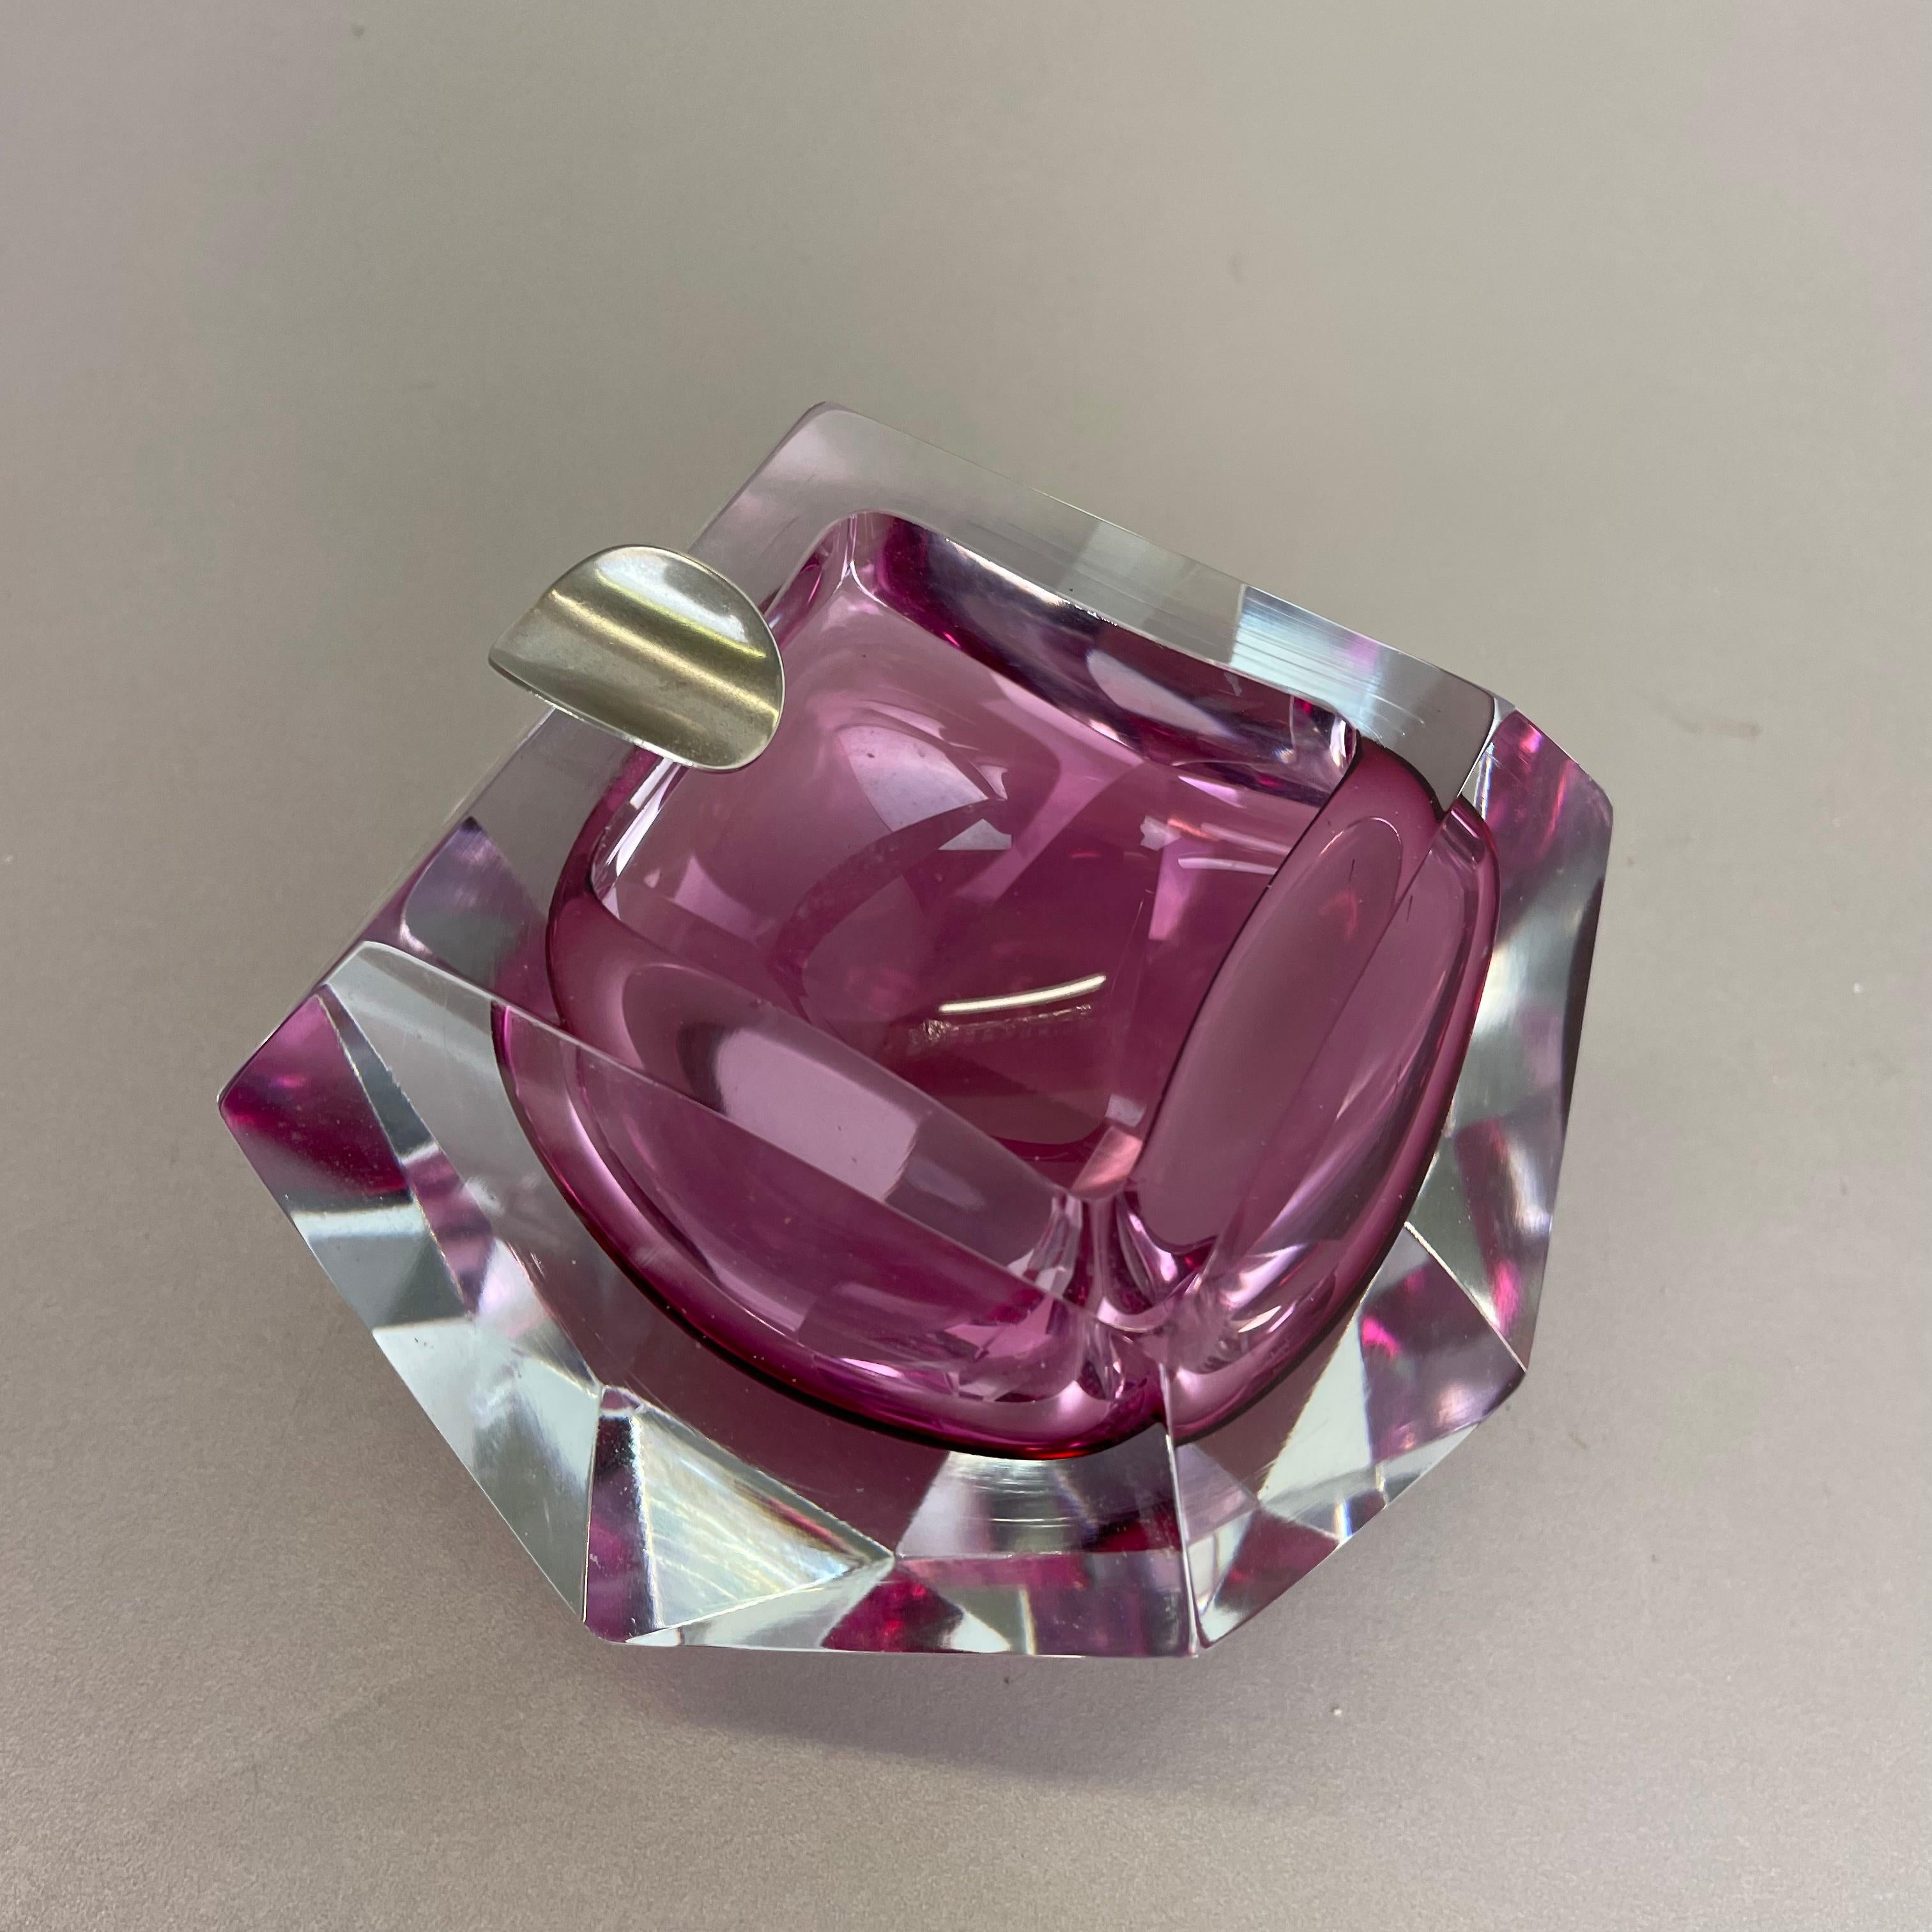 Murano Glass Sommerso pink DIAMOND Bowl Ashtray by Flavio Poli, Italy, 1970s For Sale 2